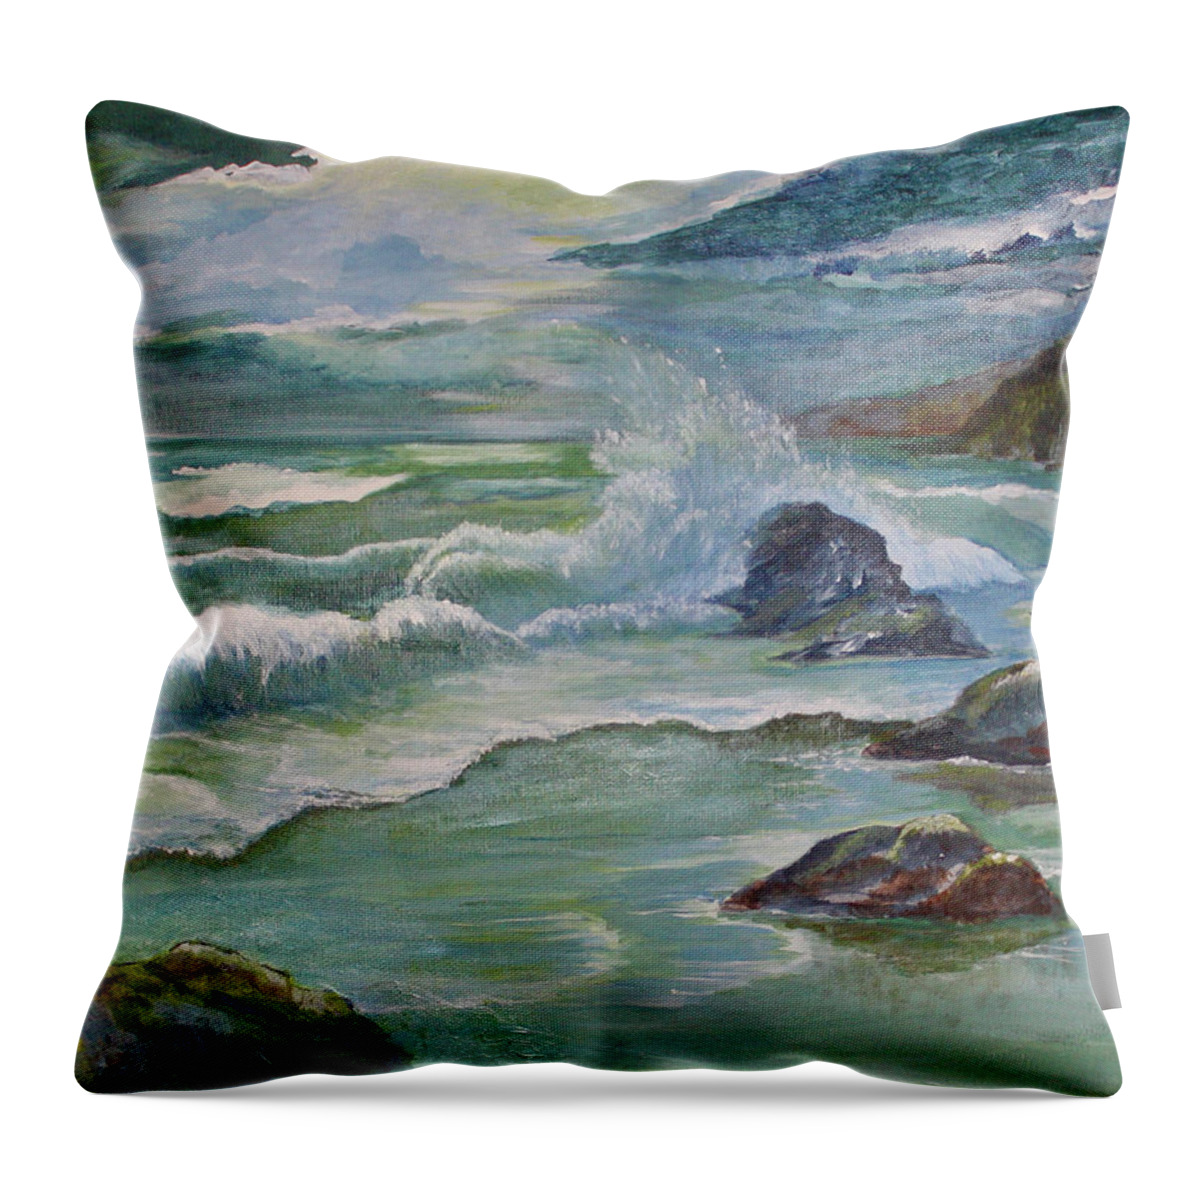 Ocean Throw Pillow featuring the painting The Living Sea by Peggy Rose